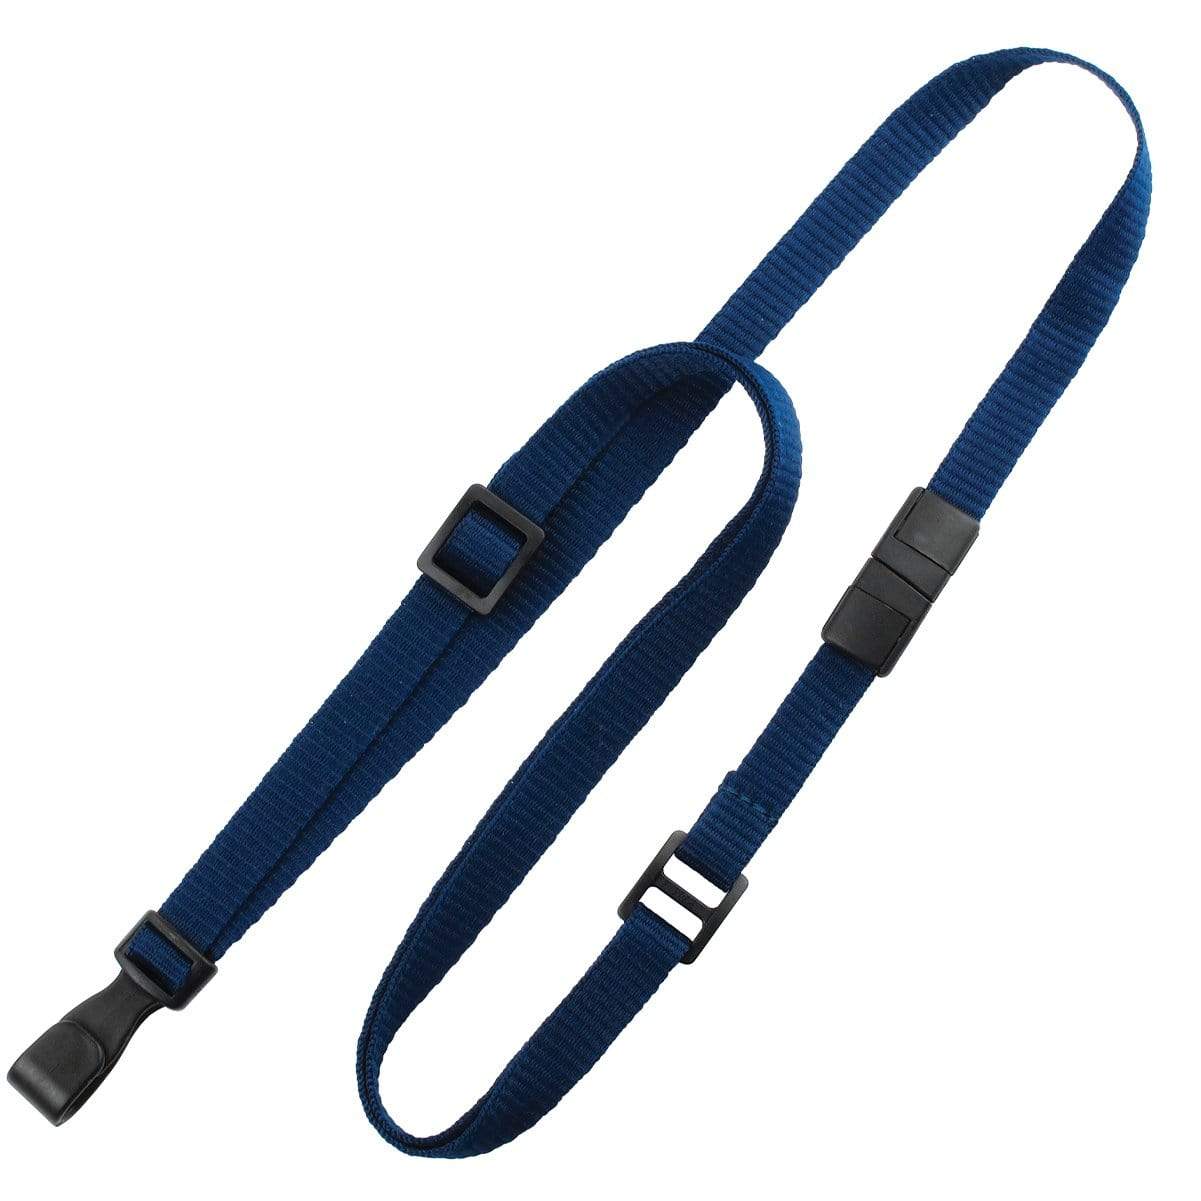 Navy Blue Adjustable Breakaway Lanyards Great For All SIzes (2137-203X) 2137-2033